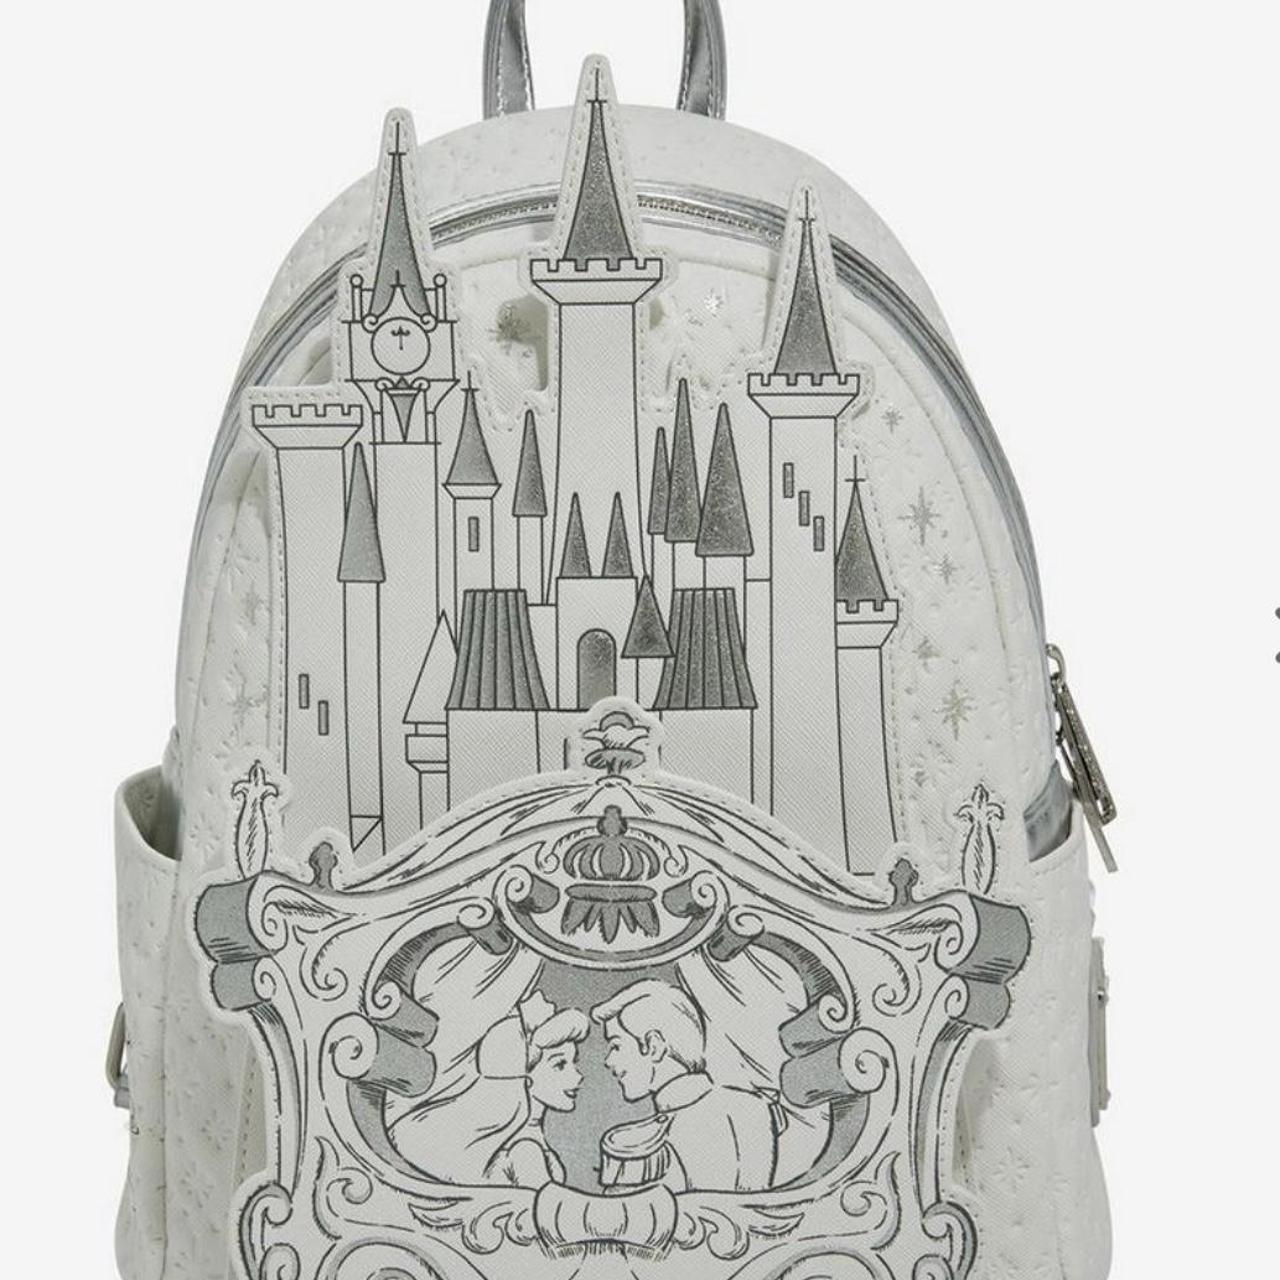 Disney Cinderella Happily Ever After Mini Backpack by Loungefly